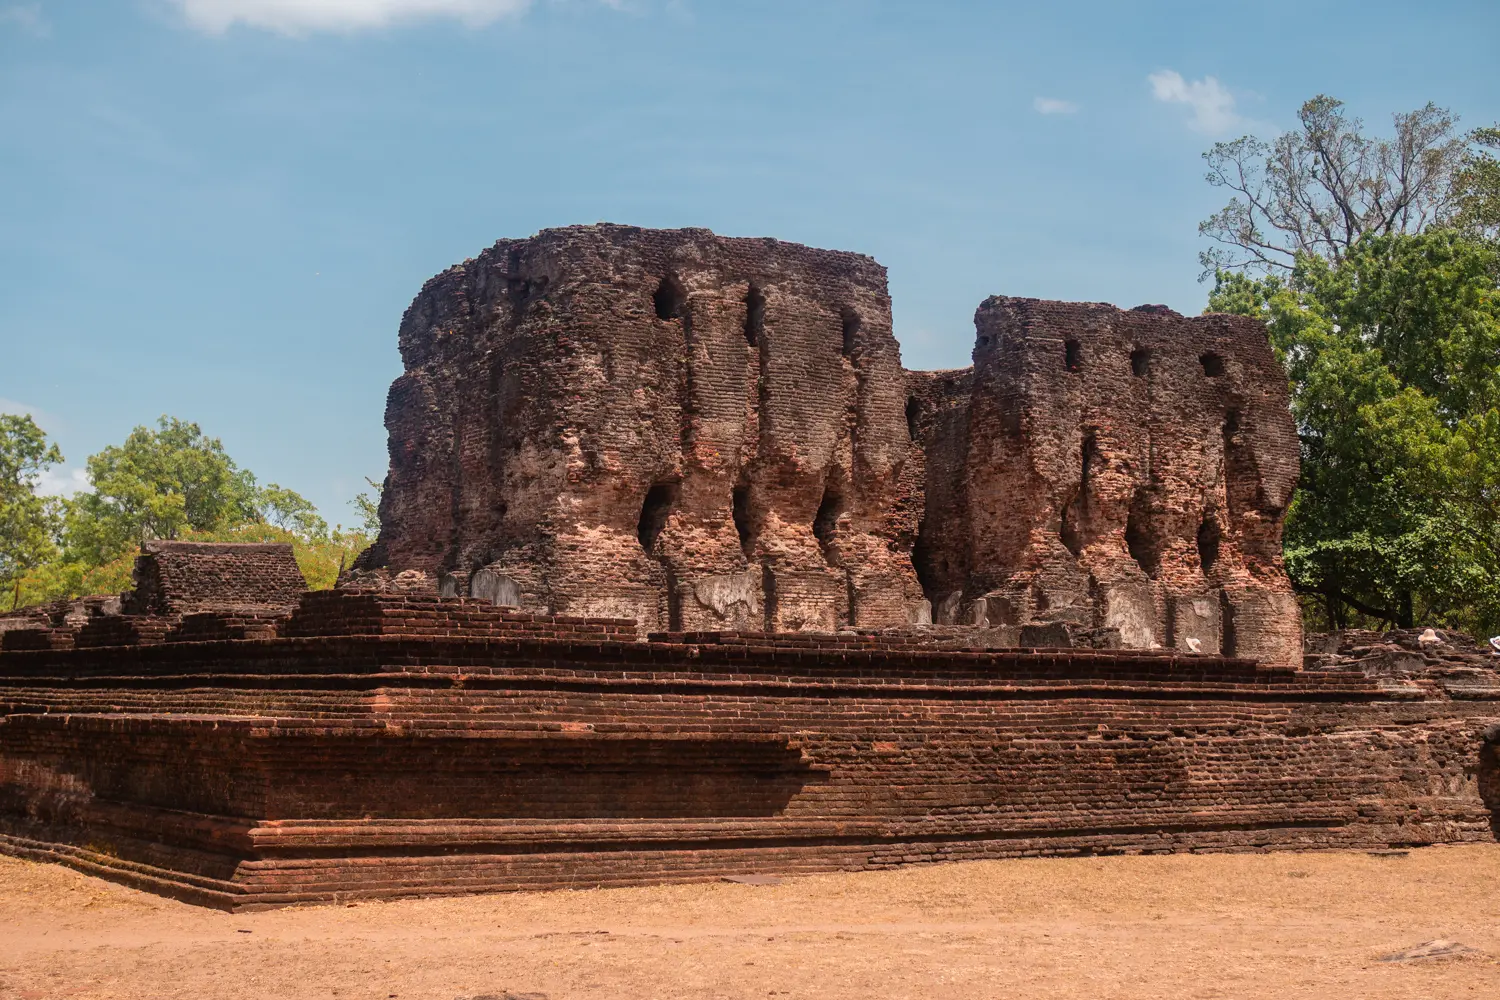 Two brick walls on a square brick foundation surrounded by green trees set against a blue sky, in the ancient city of Polonnaruwa.